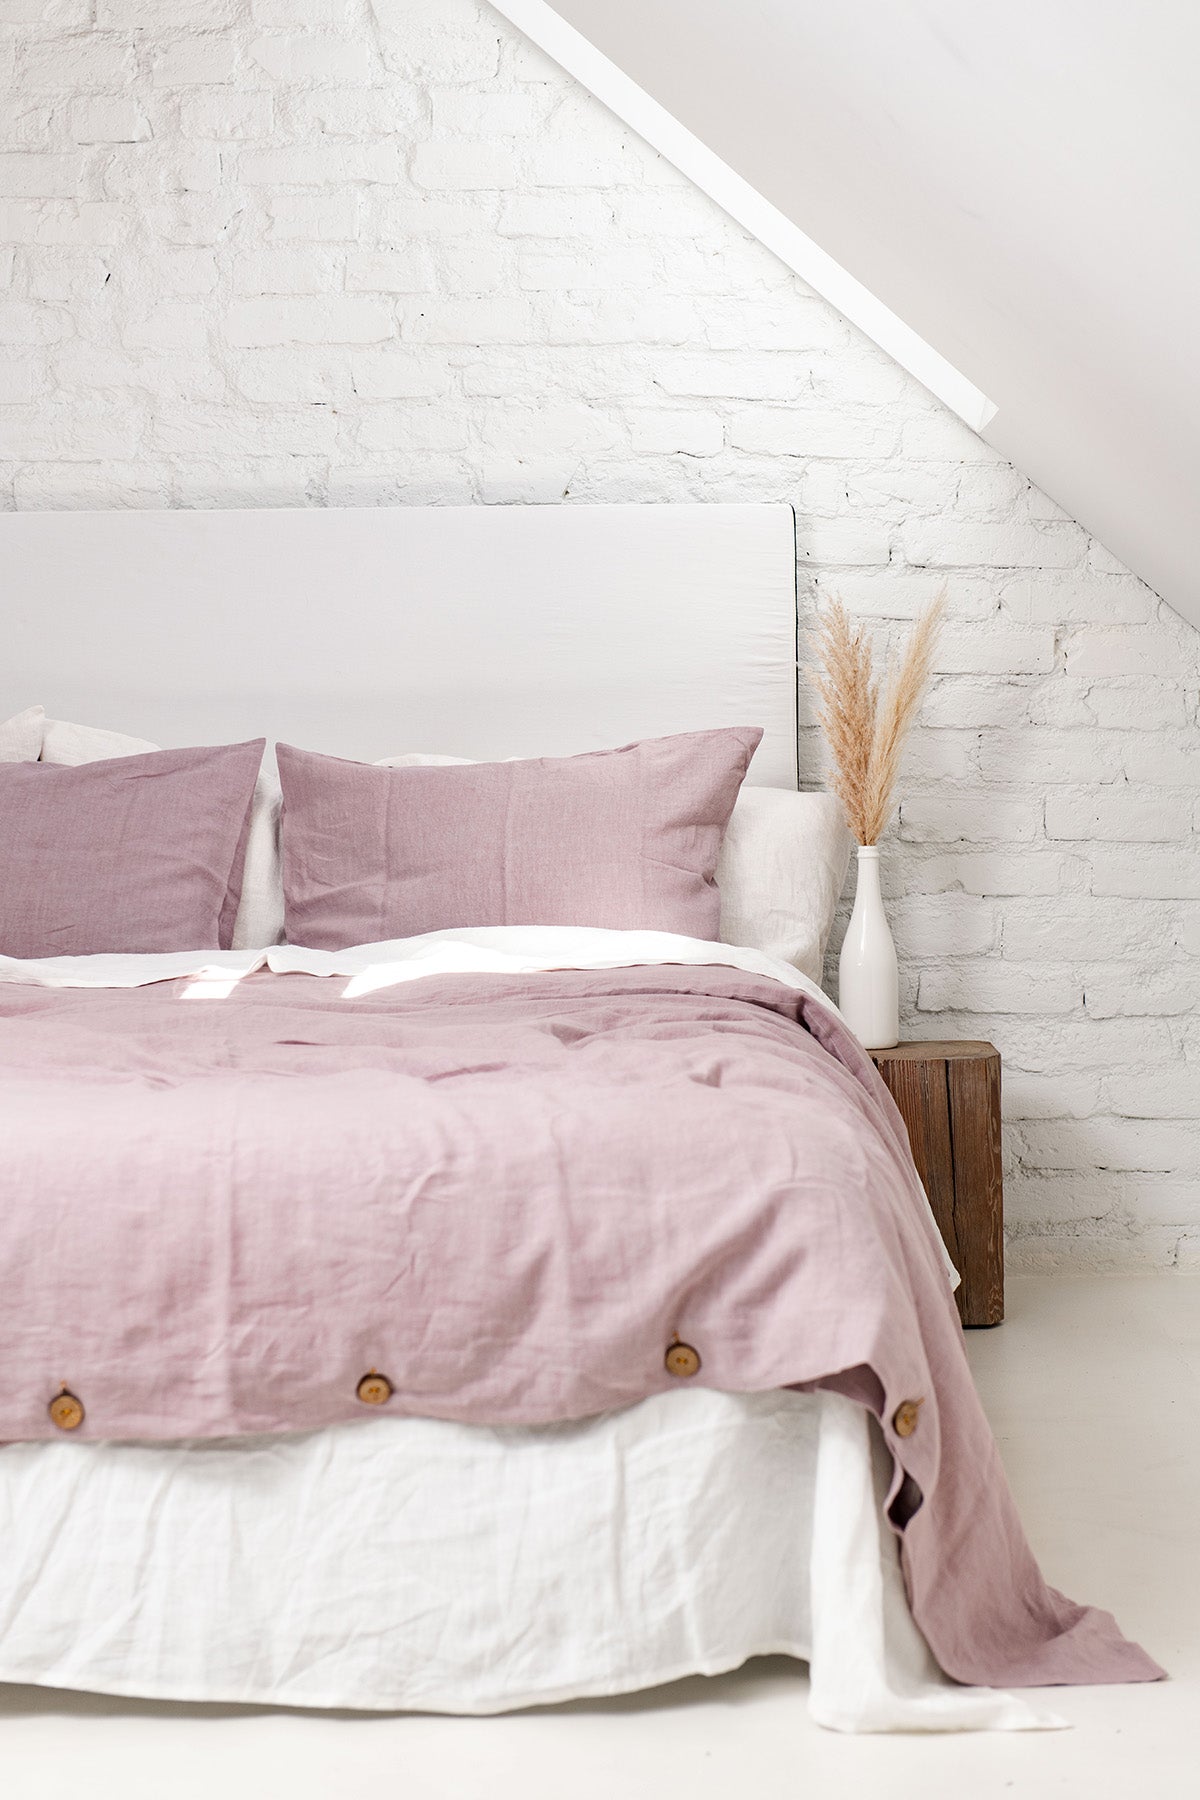 Corner of Bed With Dusty Rose Linen Duvet Cover By AmourlInen